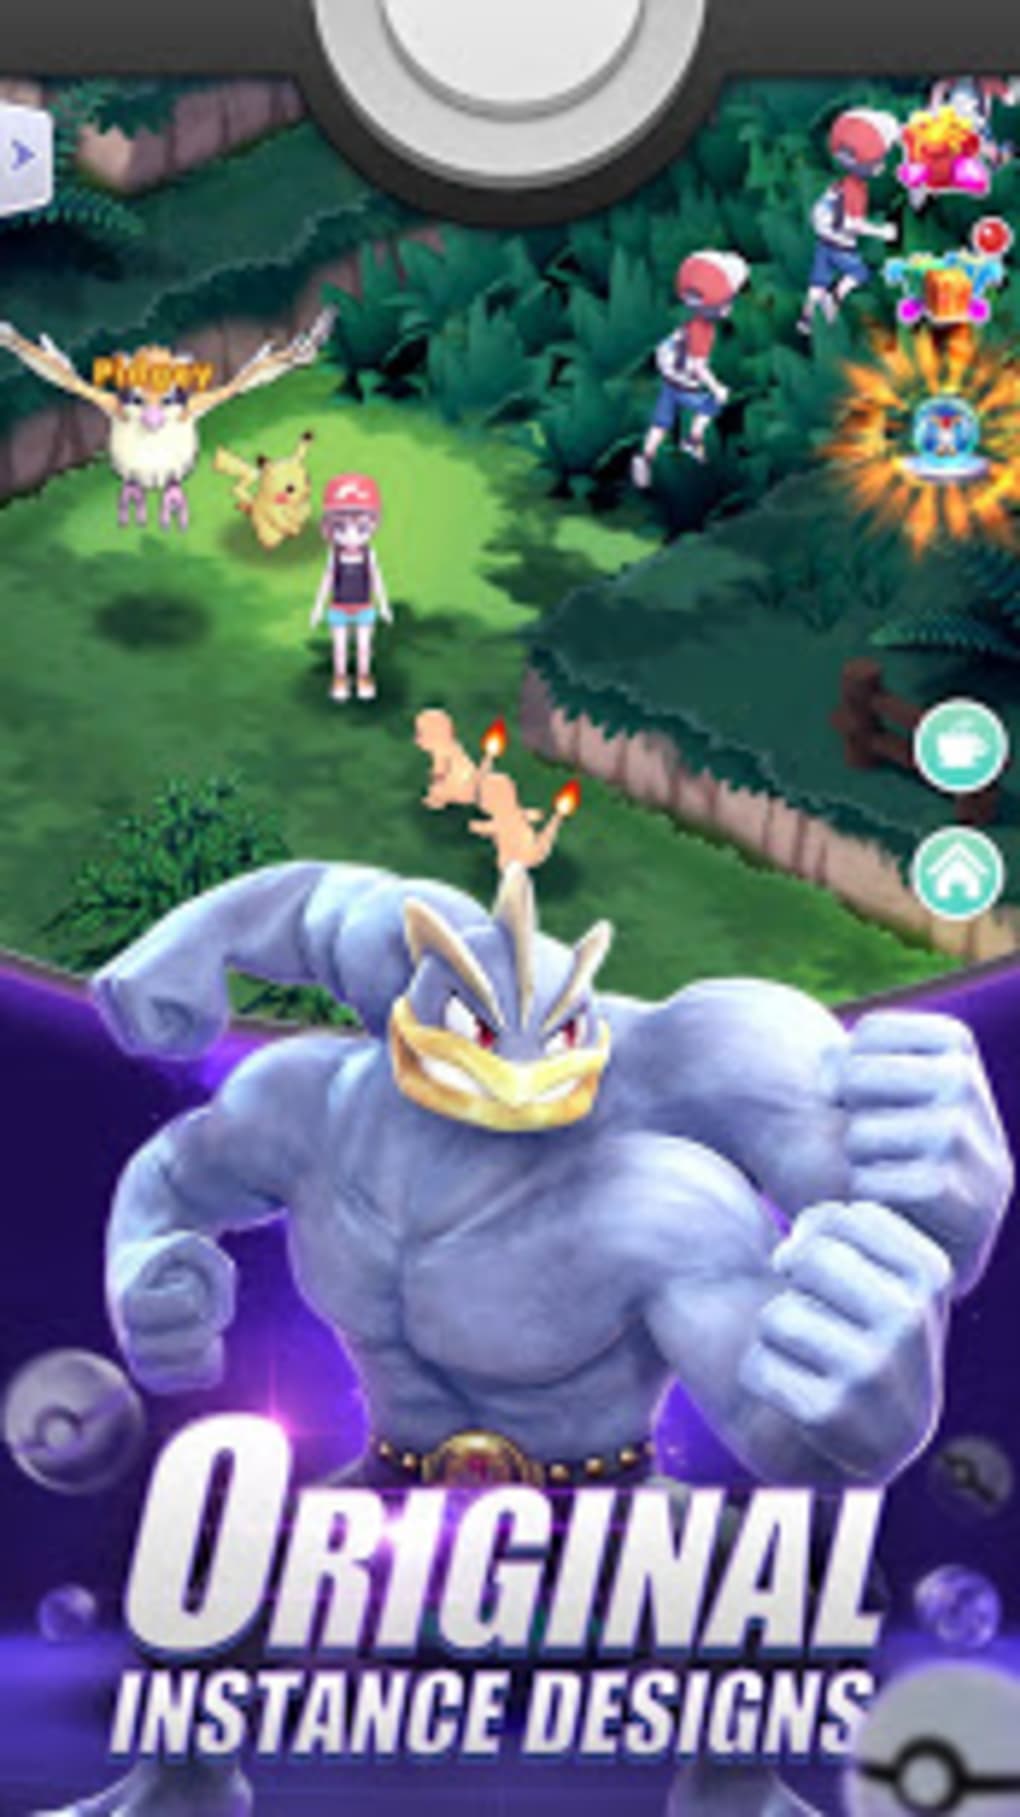 monster park pokemon game download for android